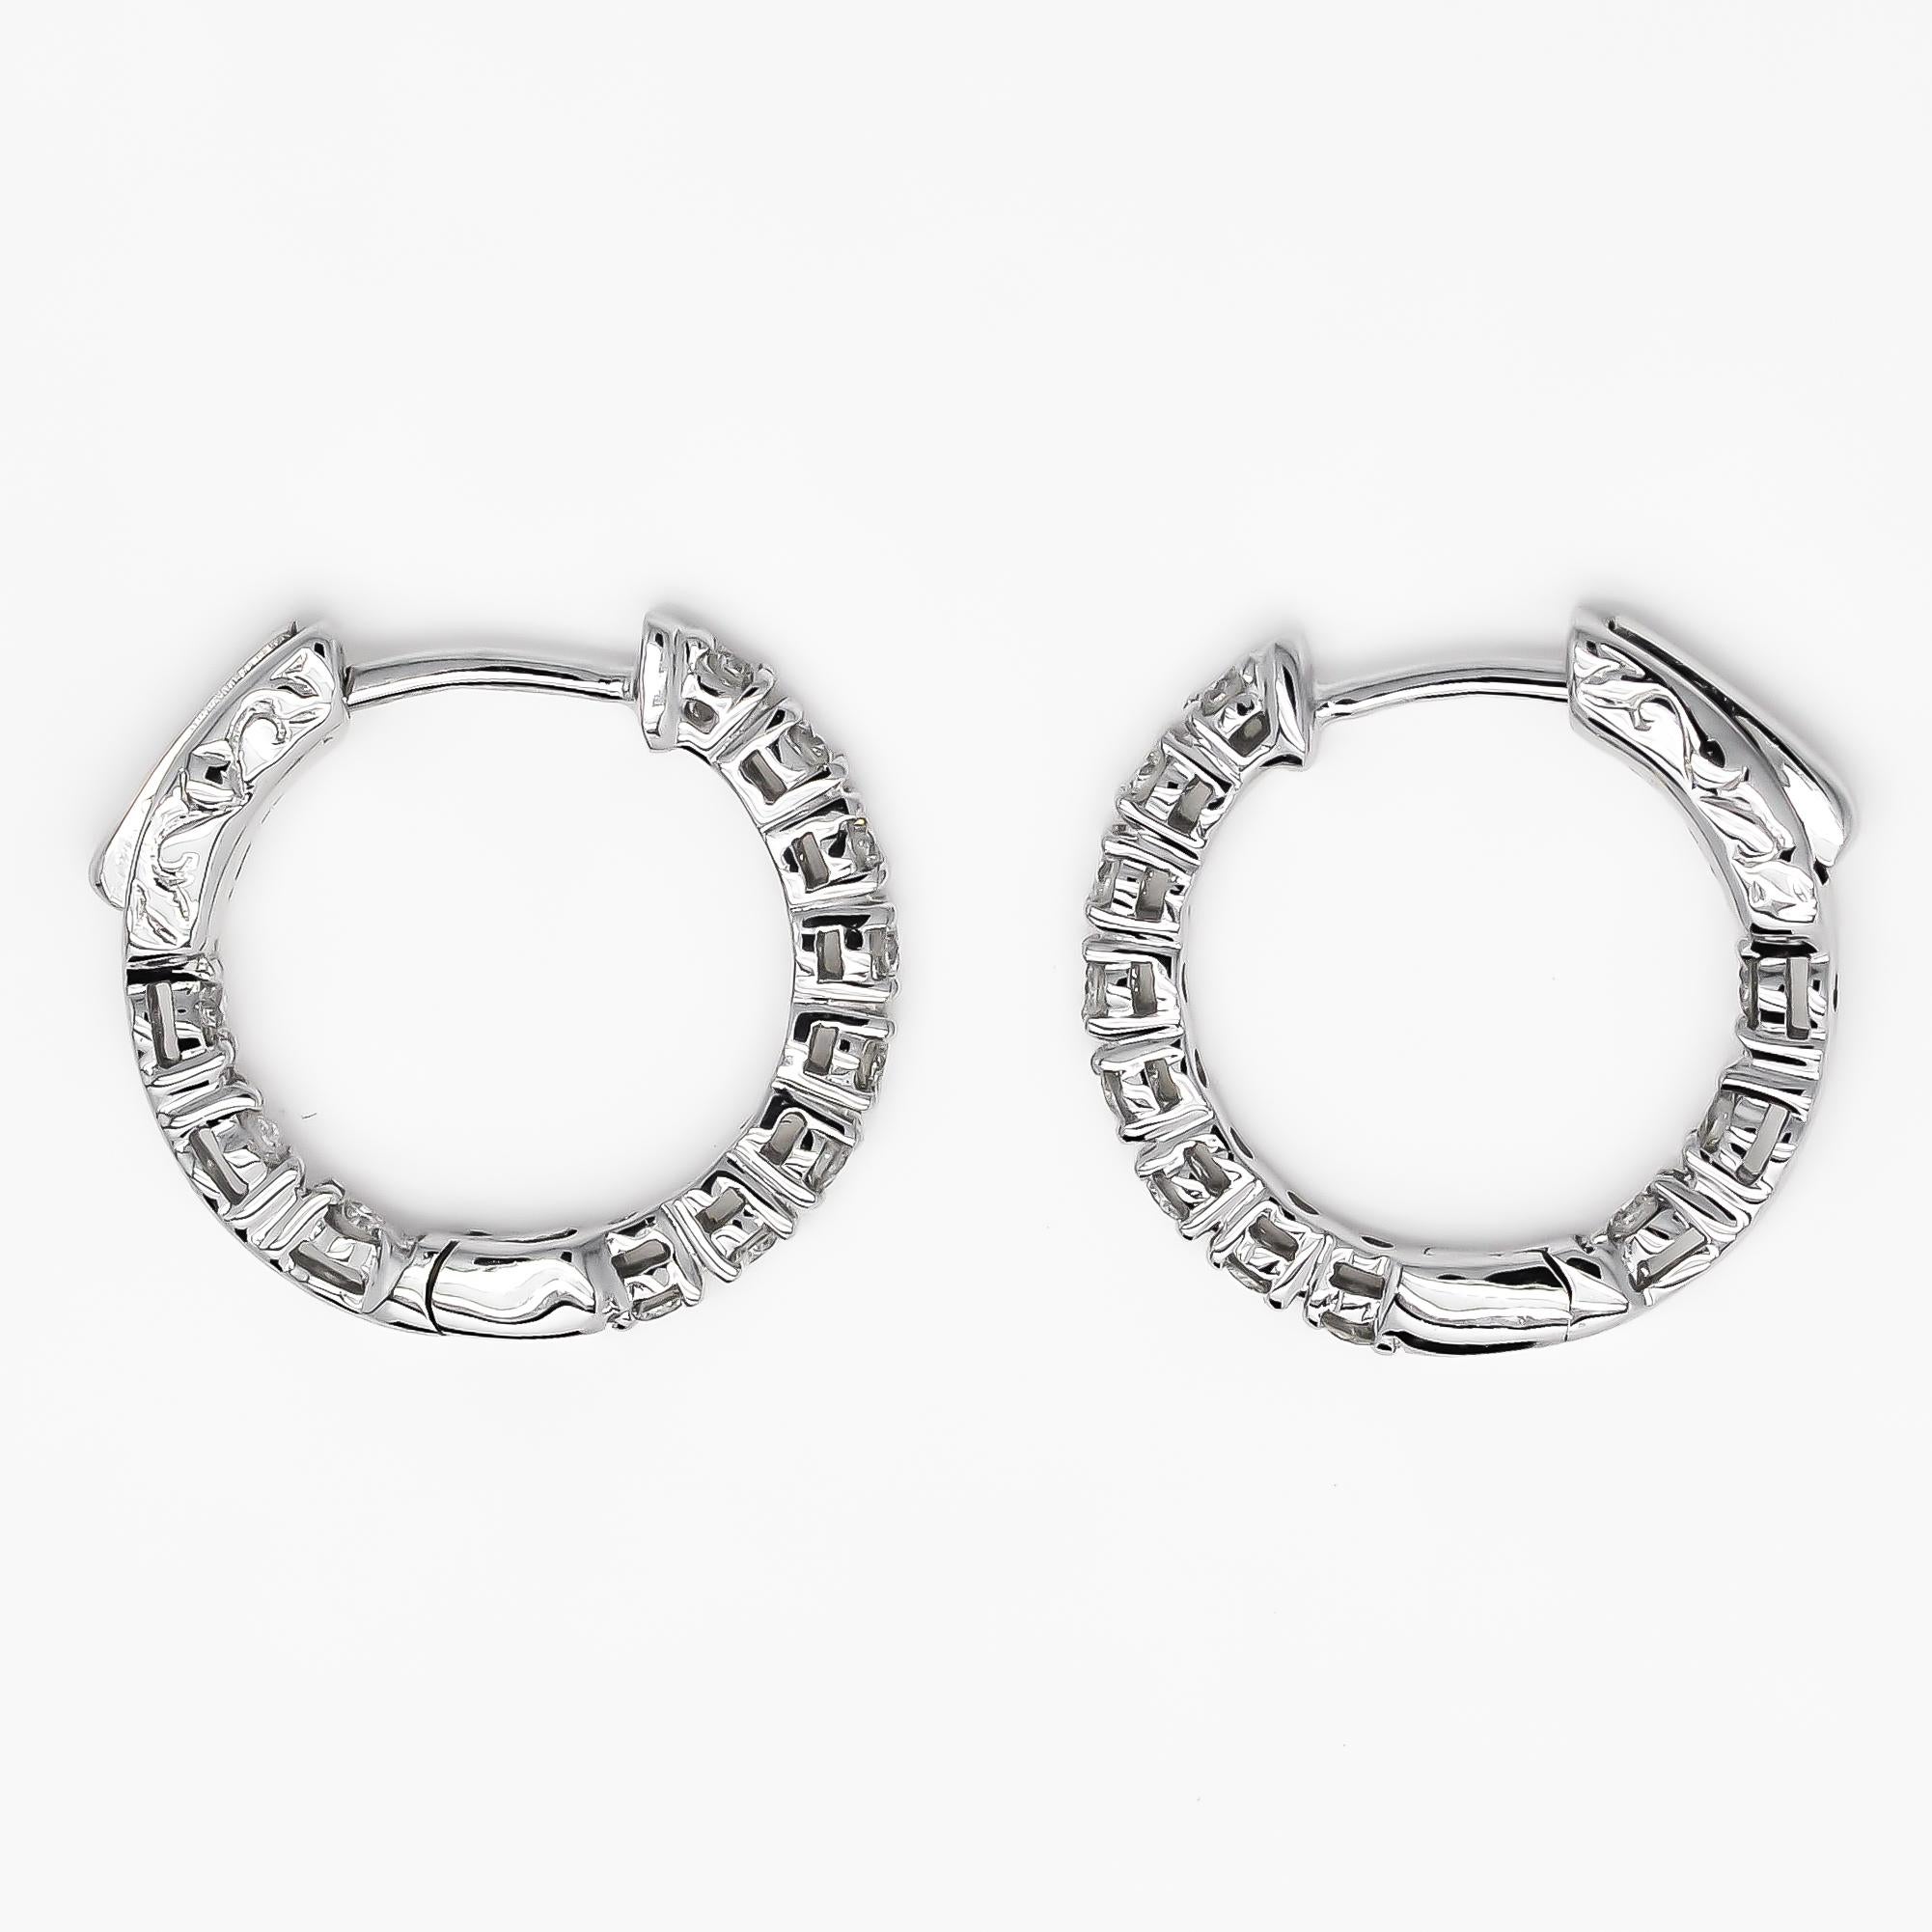 Round Cut Natural Diamond 0.55 carats 18KT White Gold 'in and out' petite Hoop Earrings  For Sale